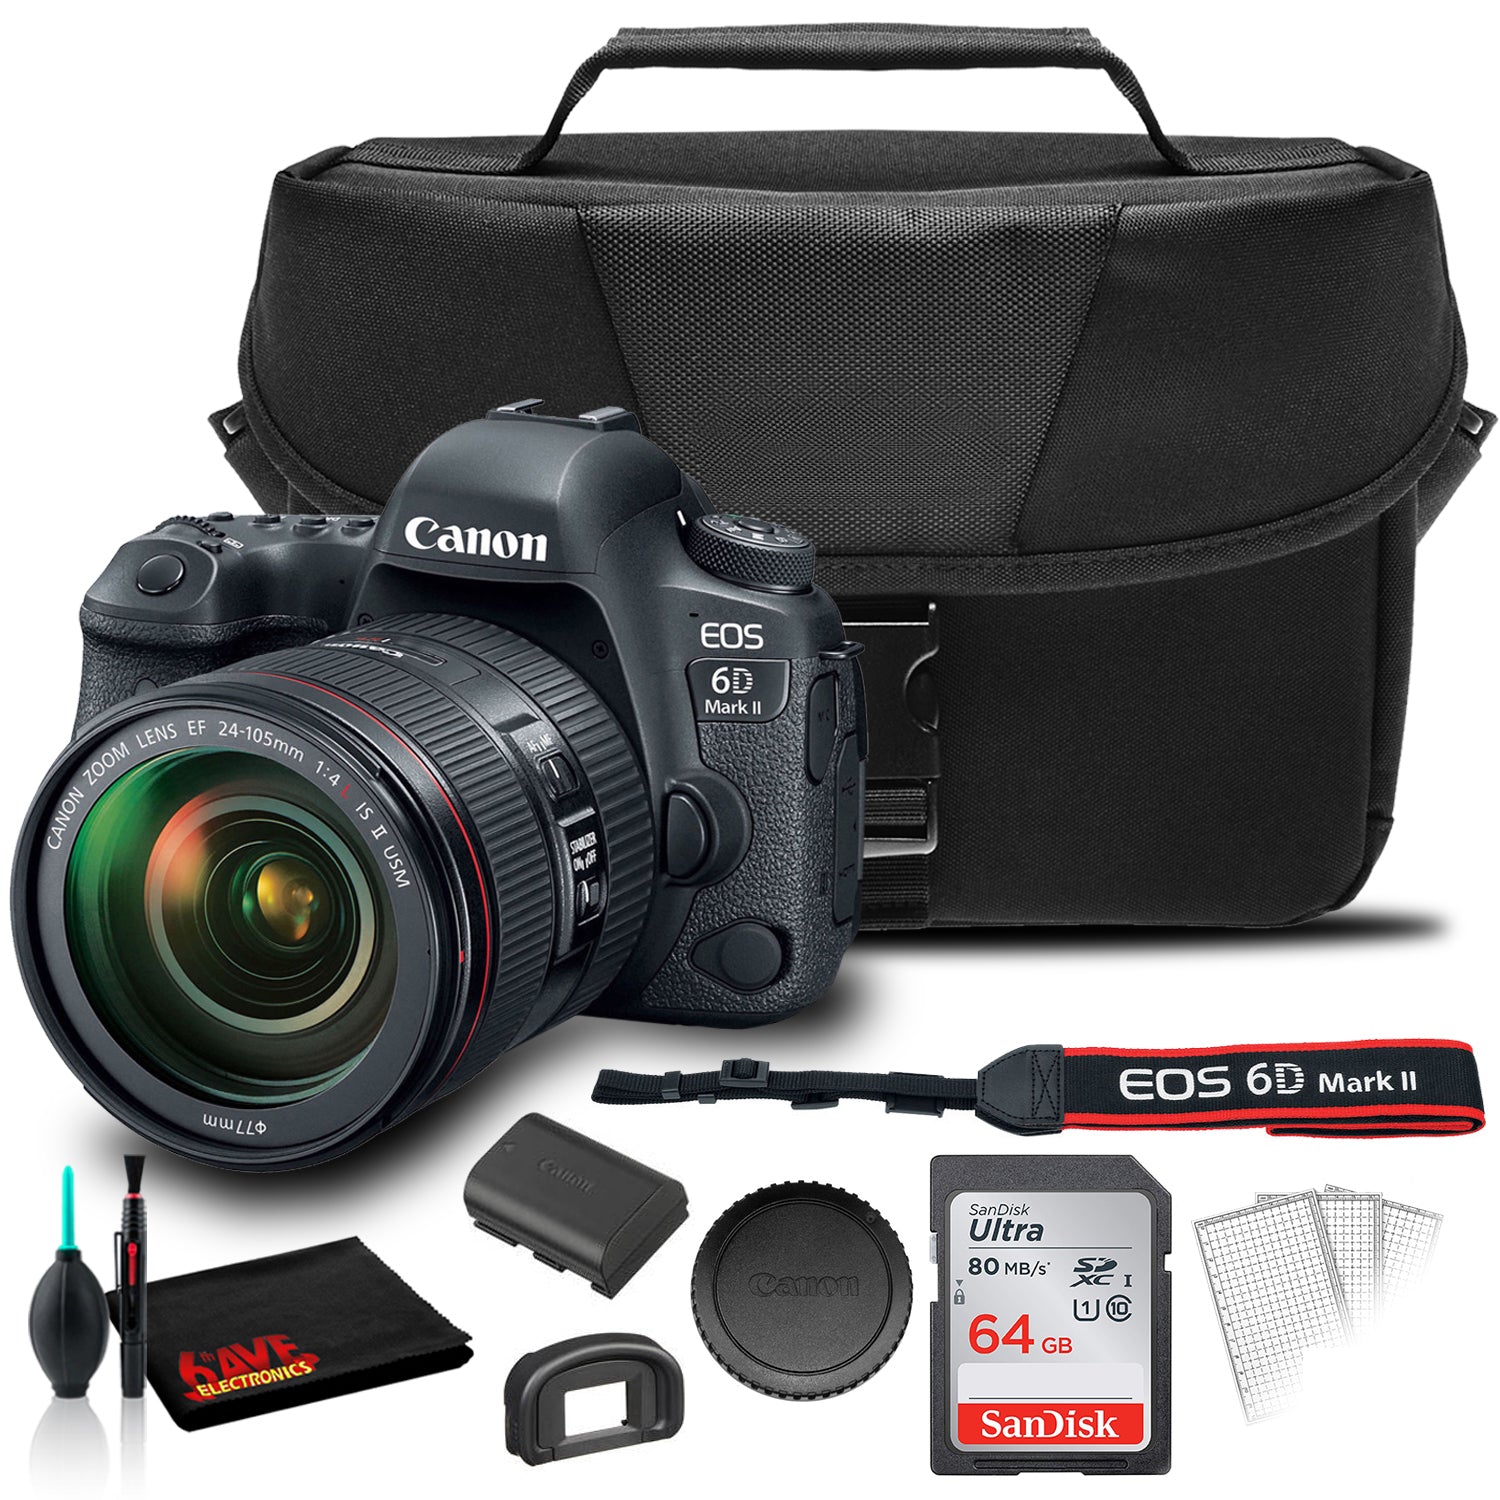 Canon EOS 6D Mark II DSLR Camera with 24-105mm L II Lens +  EOS Bag +  Sandisk Ultra 64GB Card